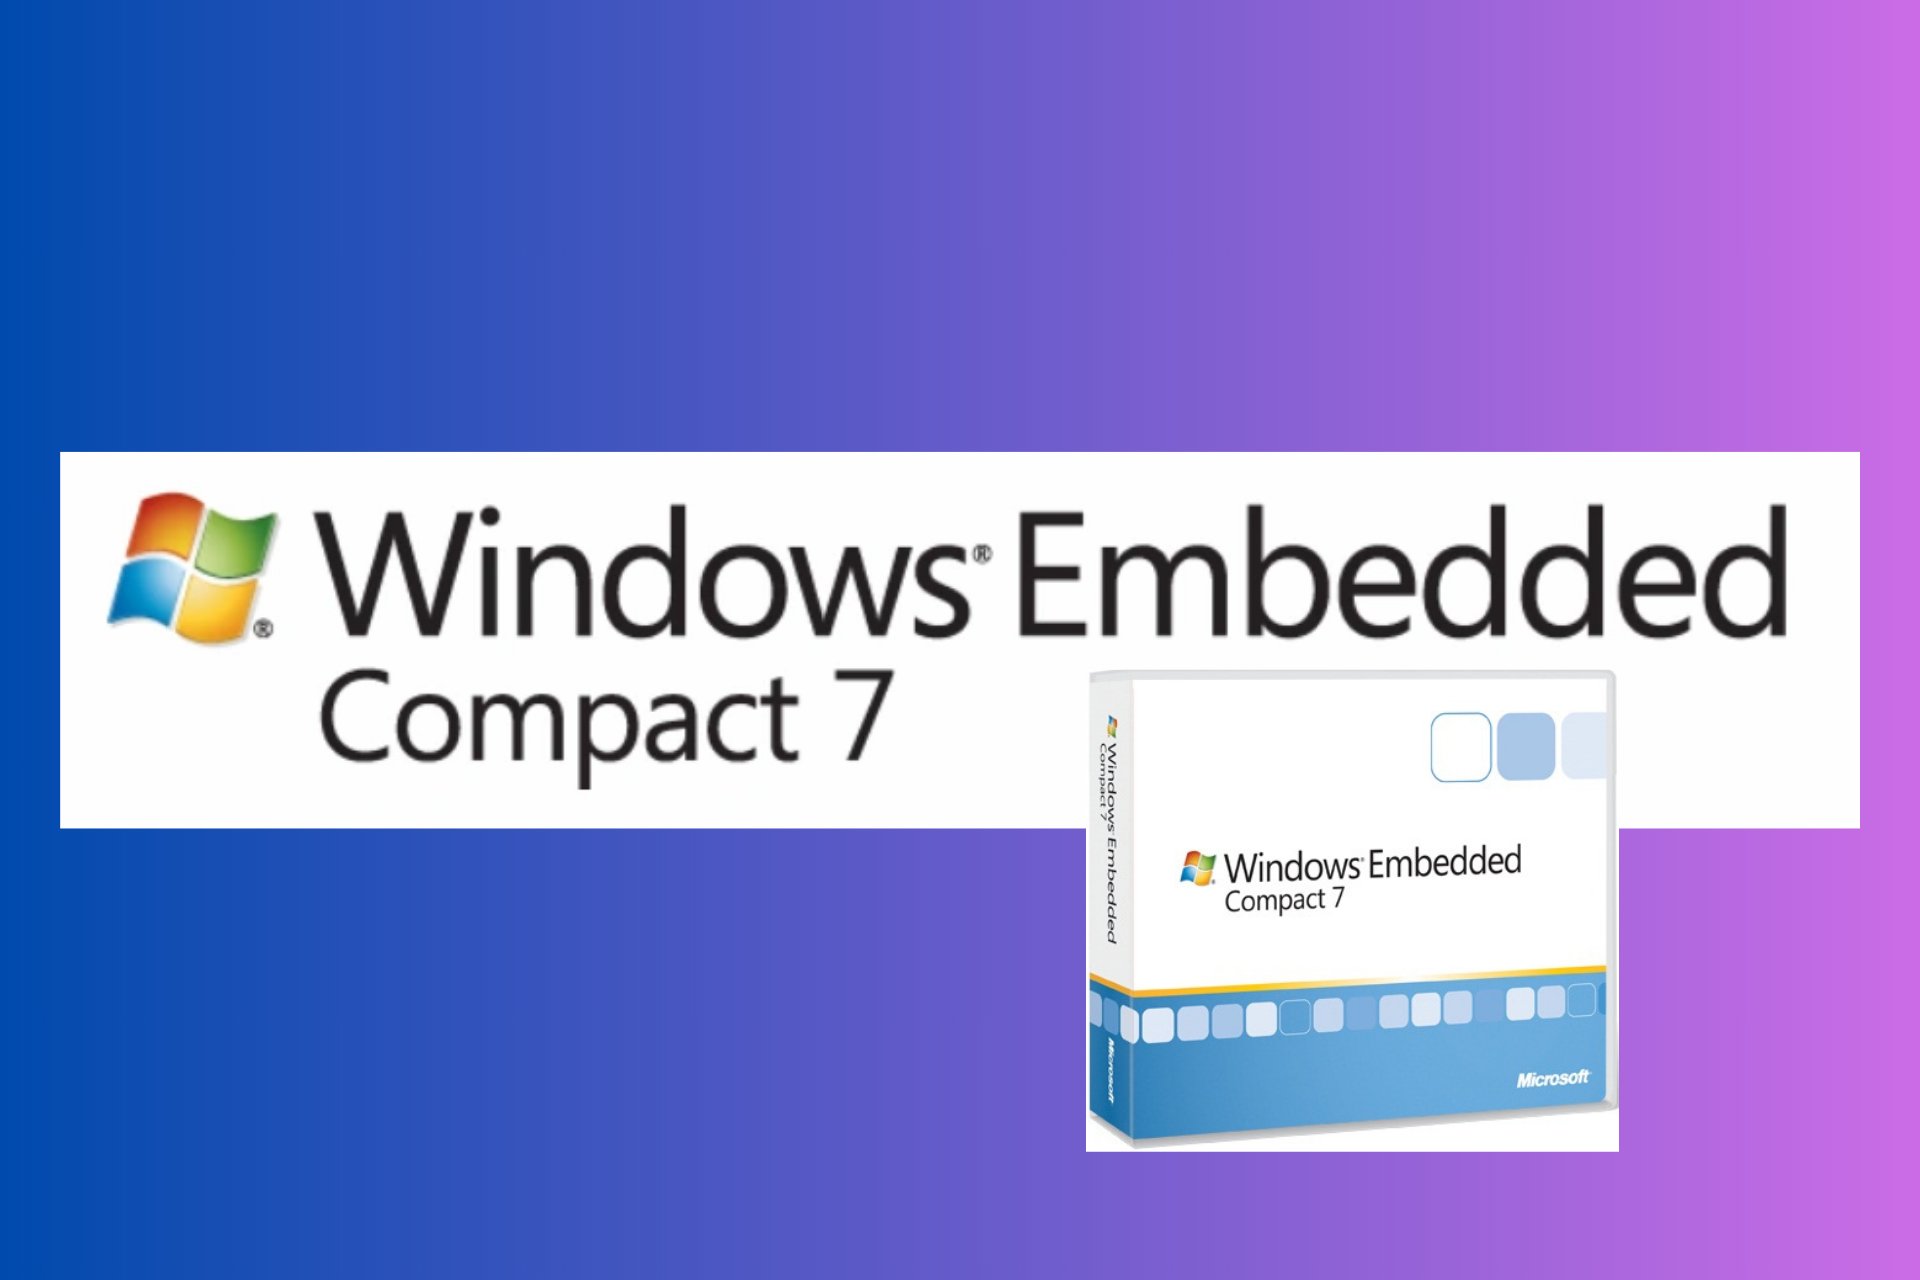 Everything you need to know about Windows Embedded Compact 7